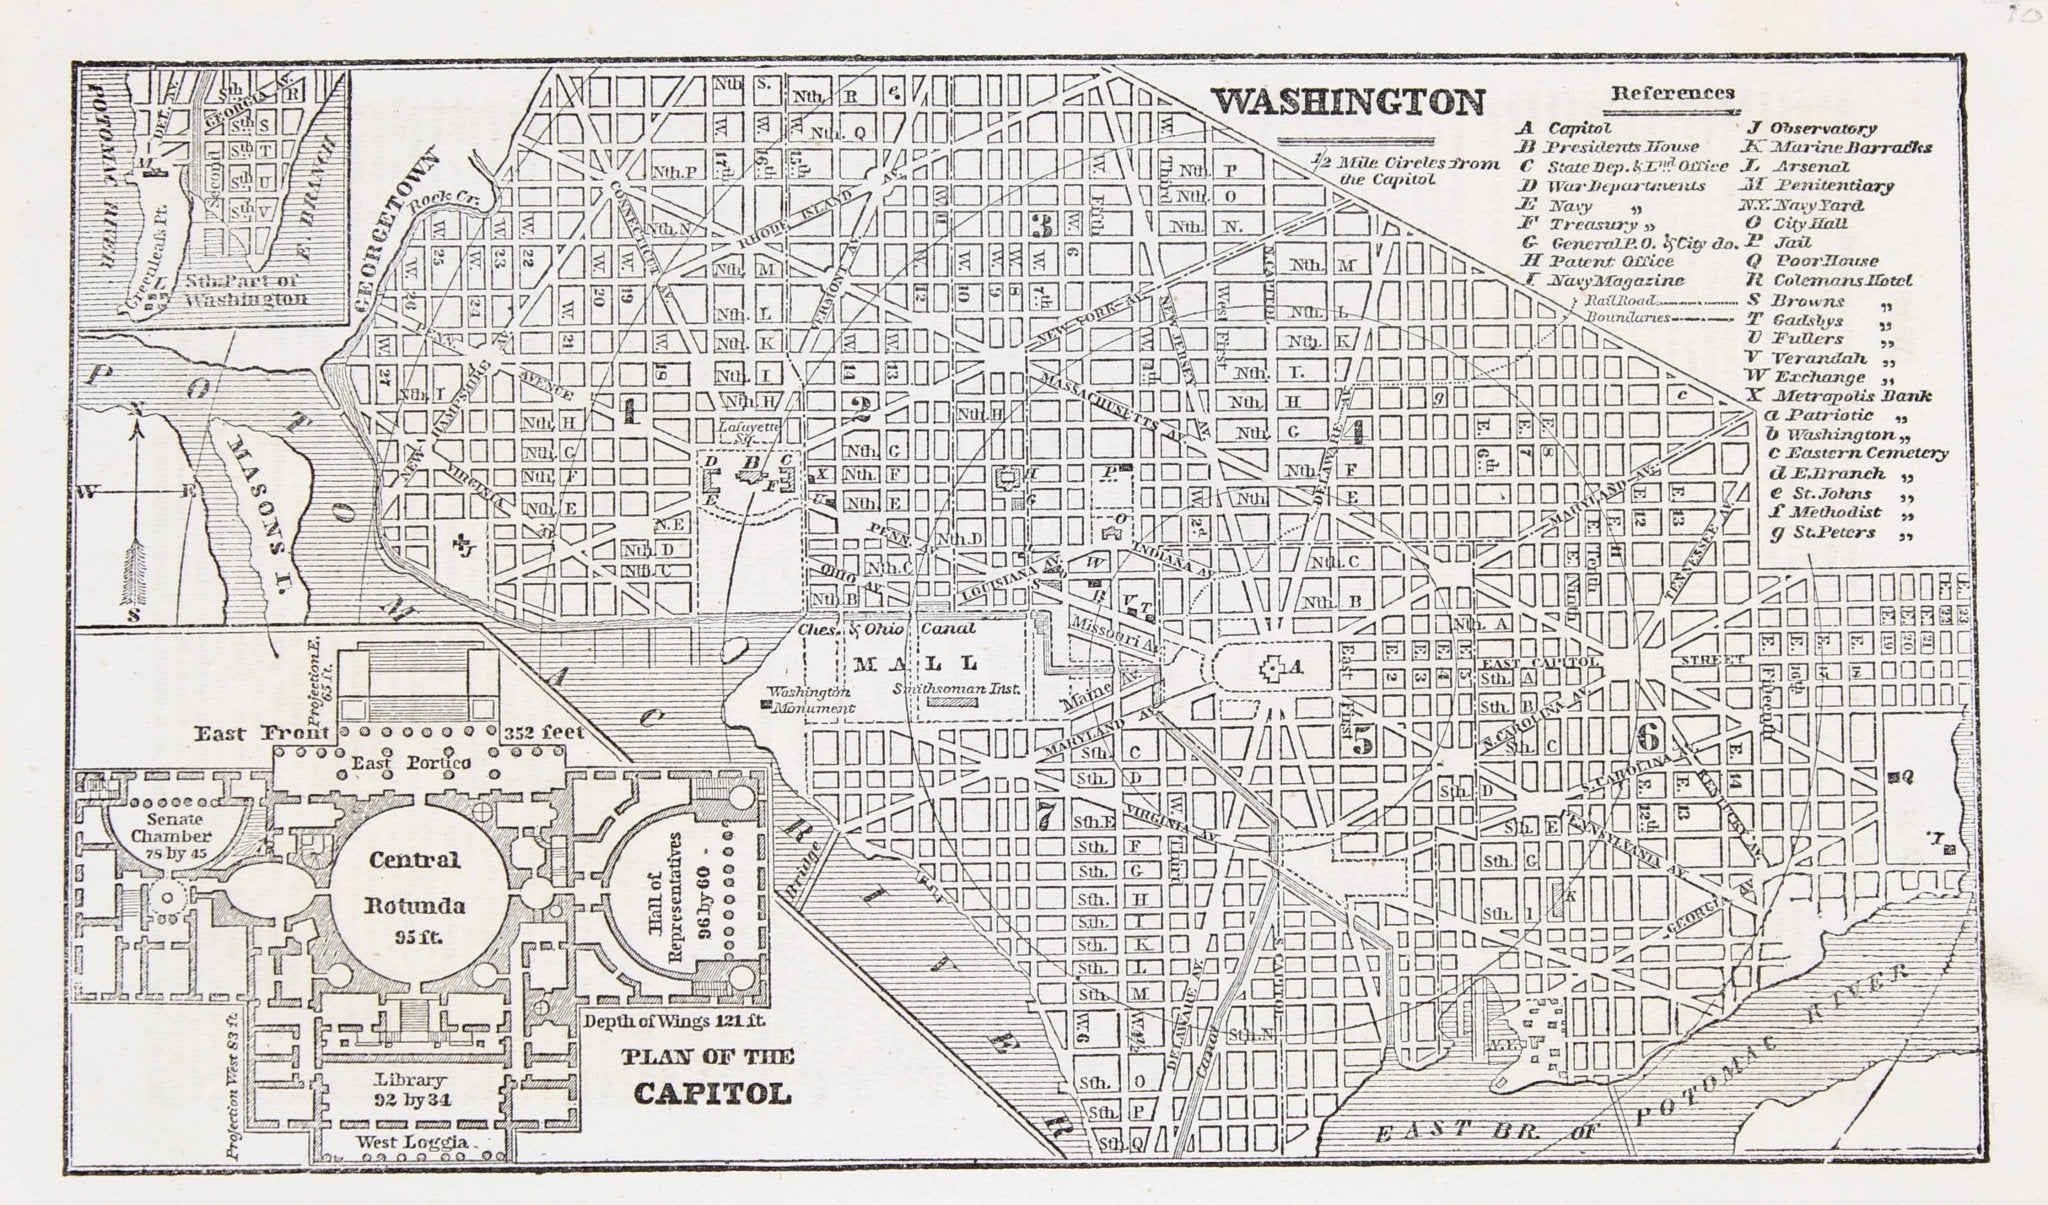 1853 “ Washington” Engraved Map from Fanning's Illustrated Gazetteer of the United States - The Great Republic